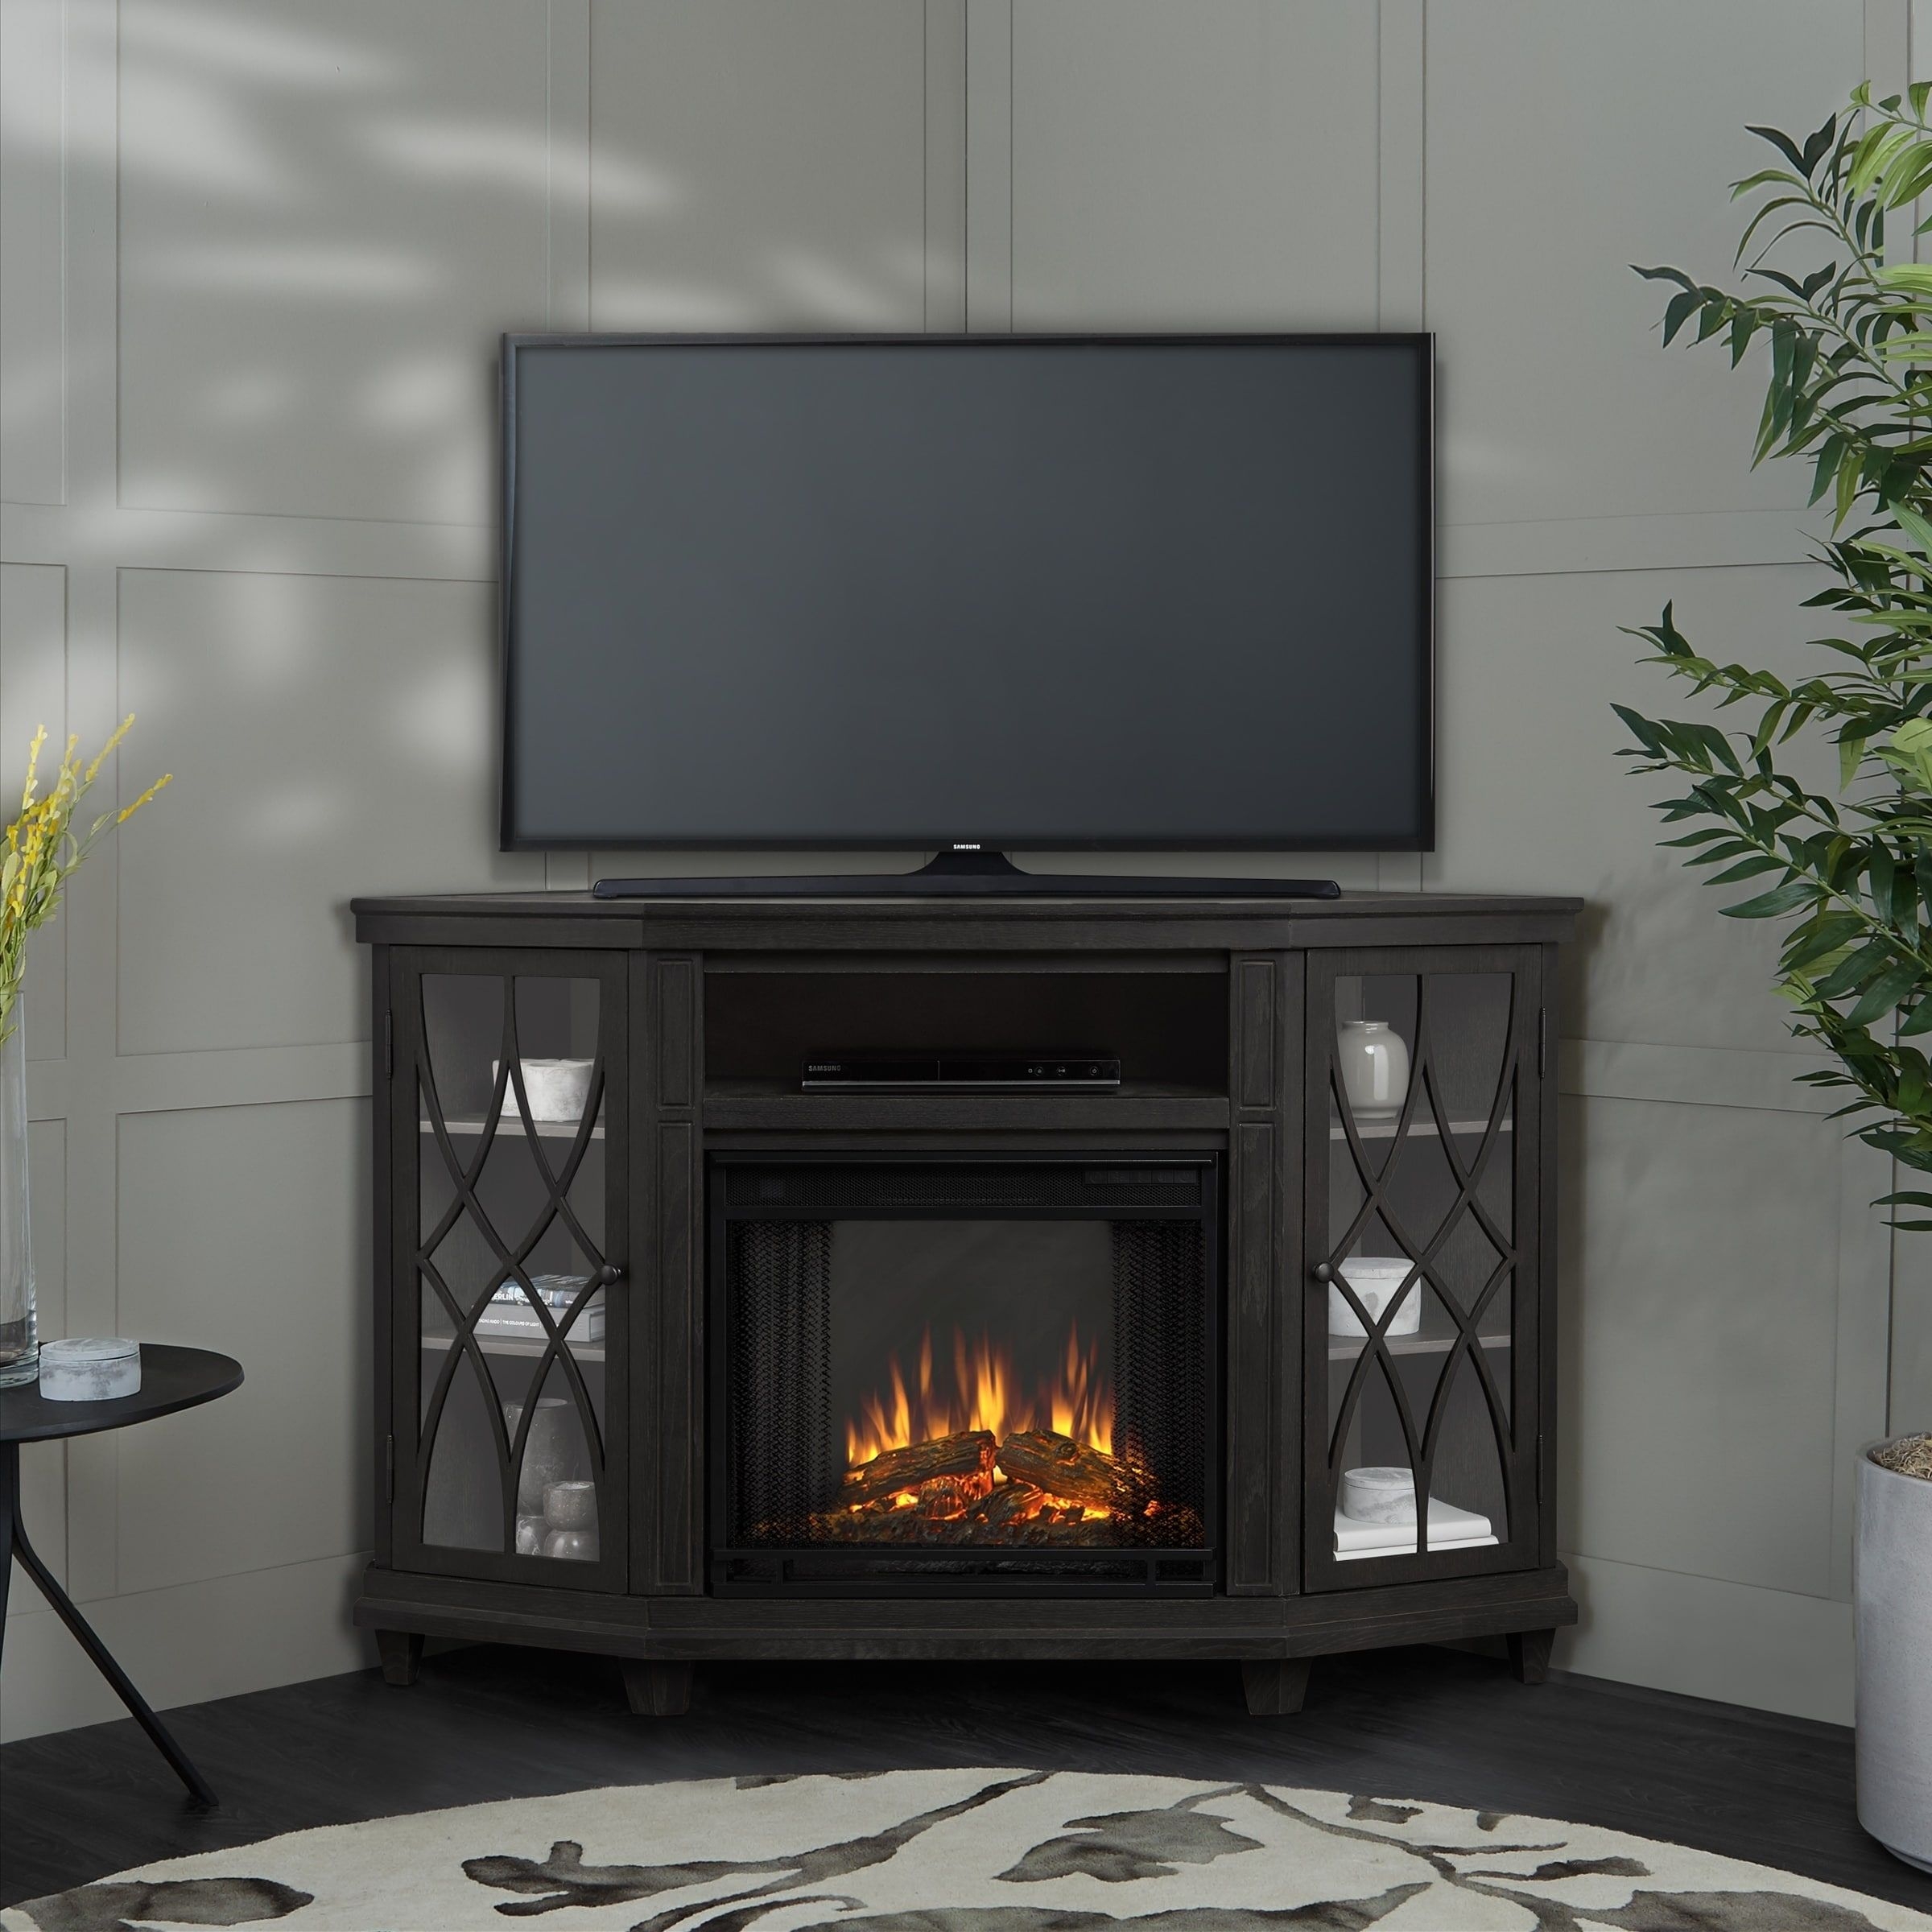 Corner unit TV Stand for TVs up to 60" with Electric Fireplace Included